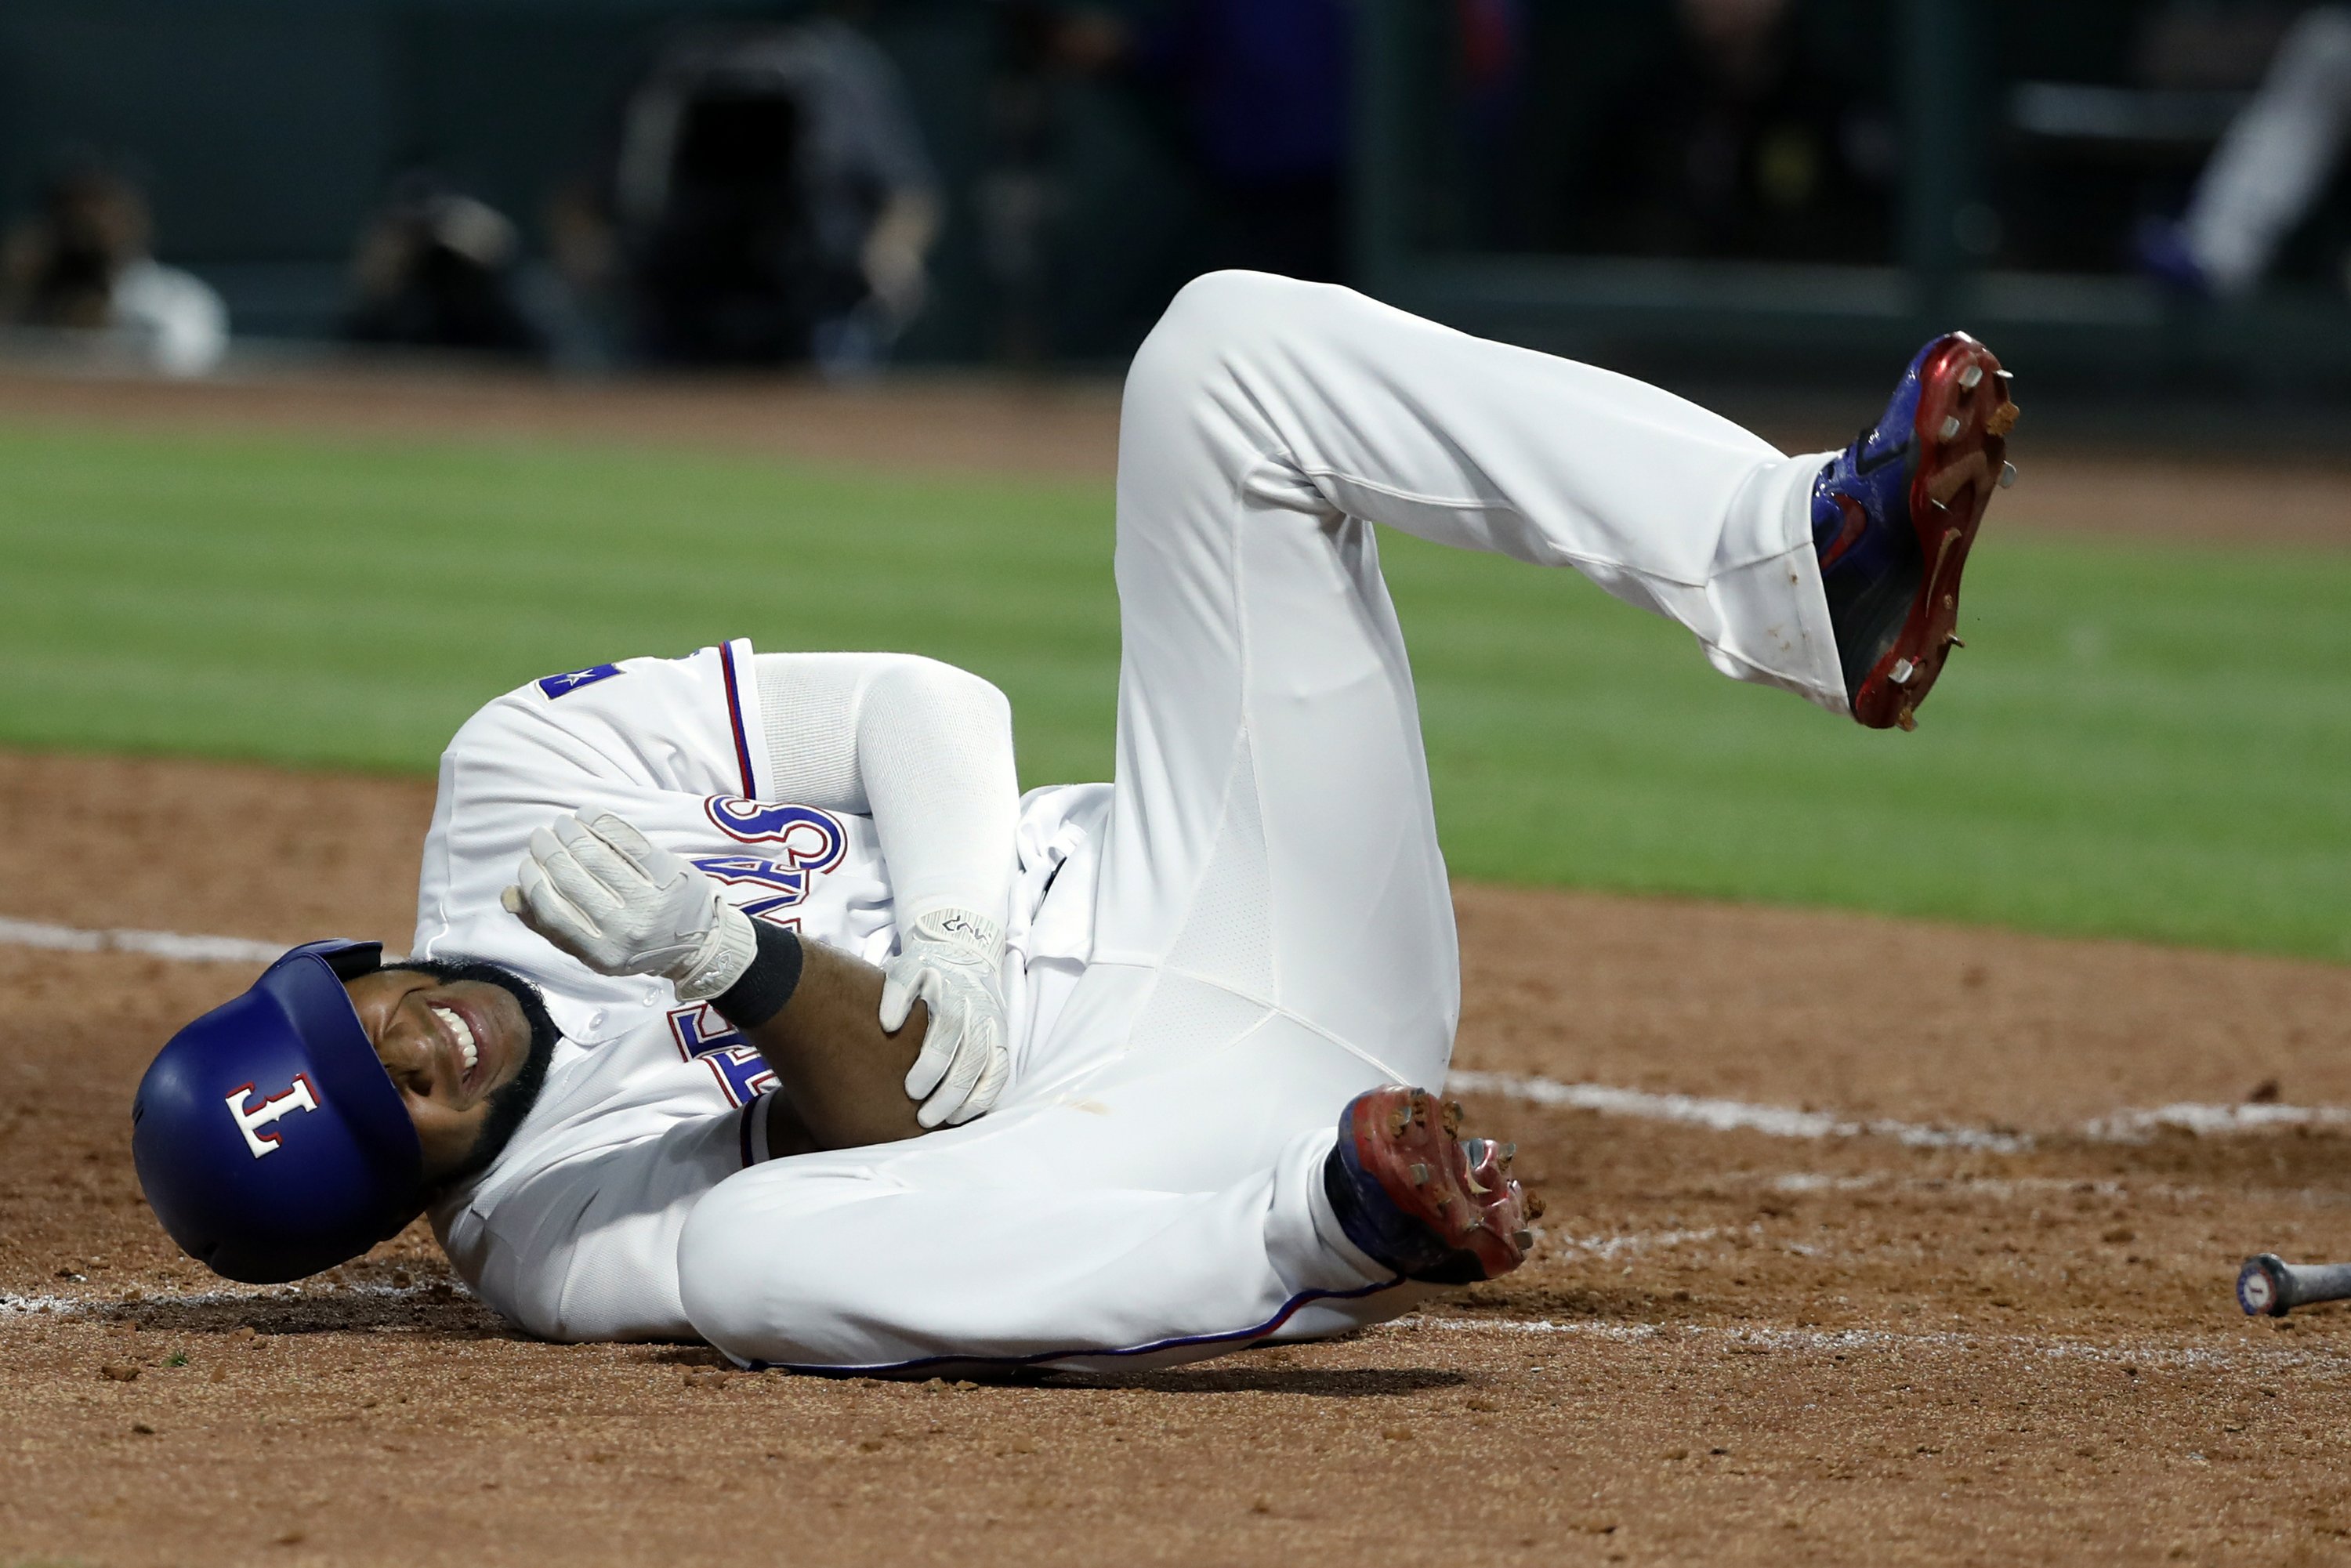 Losses mounting for Texas Rangers in lineup, standings AP News